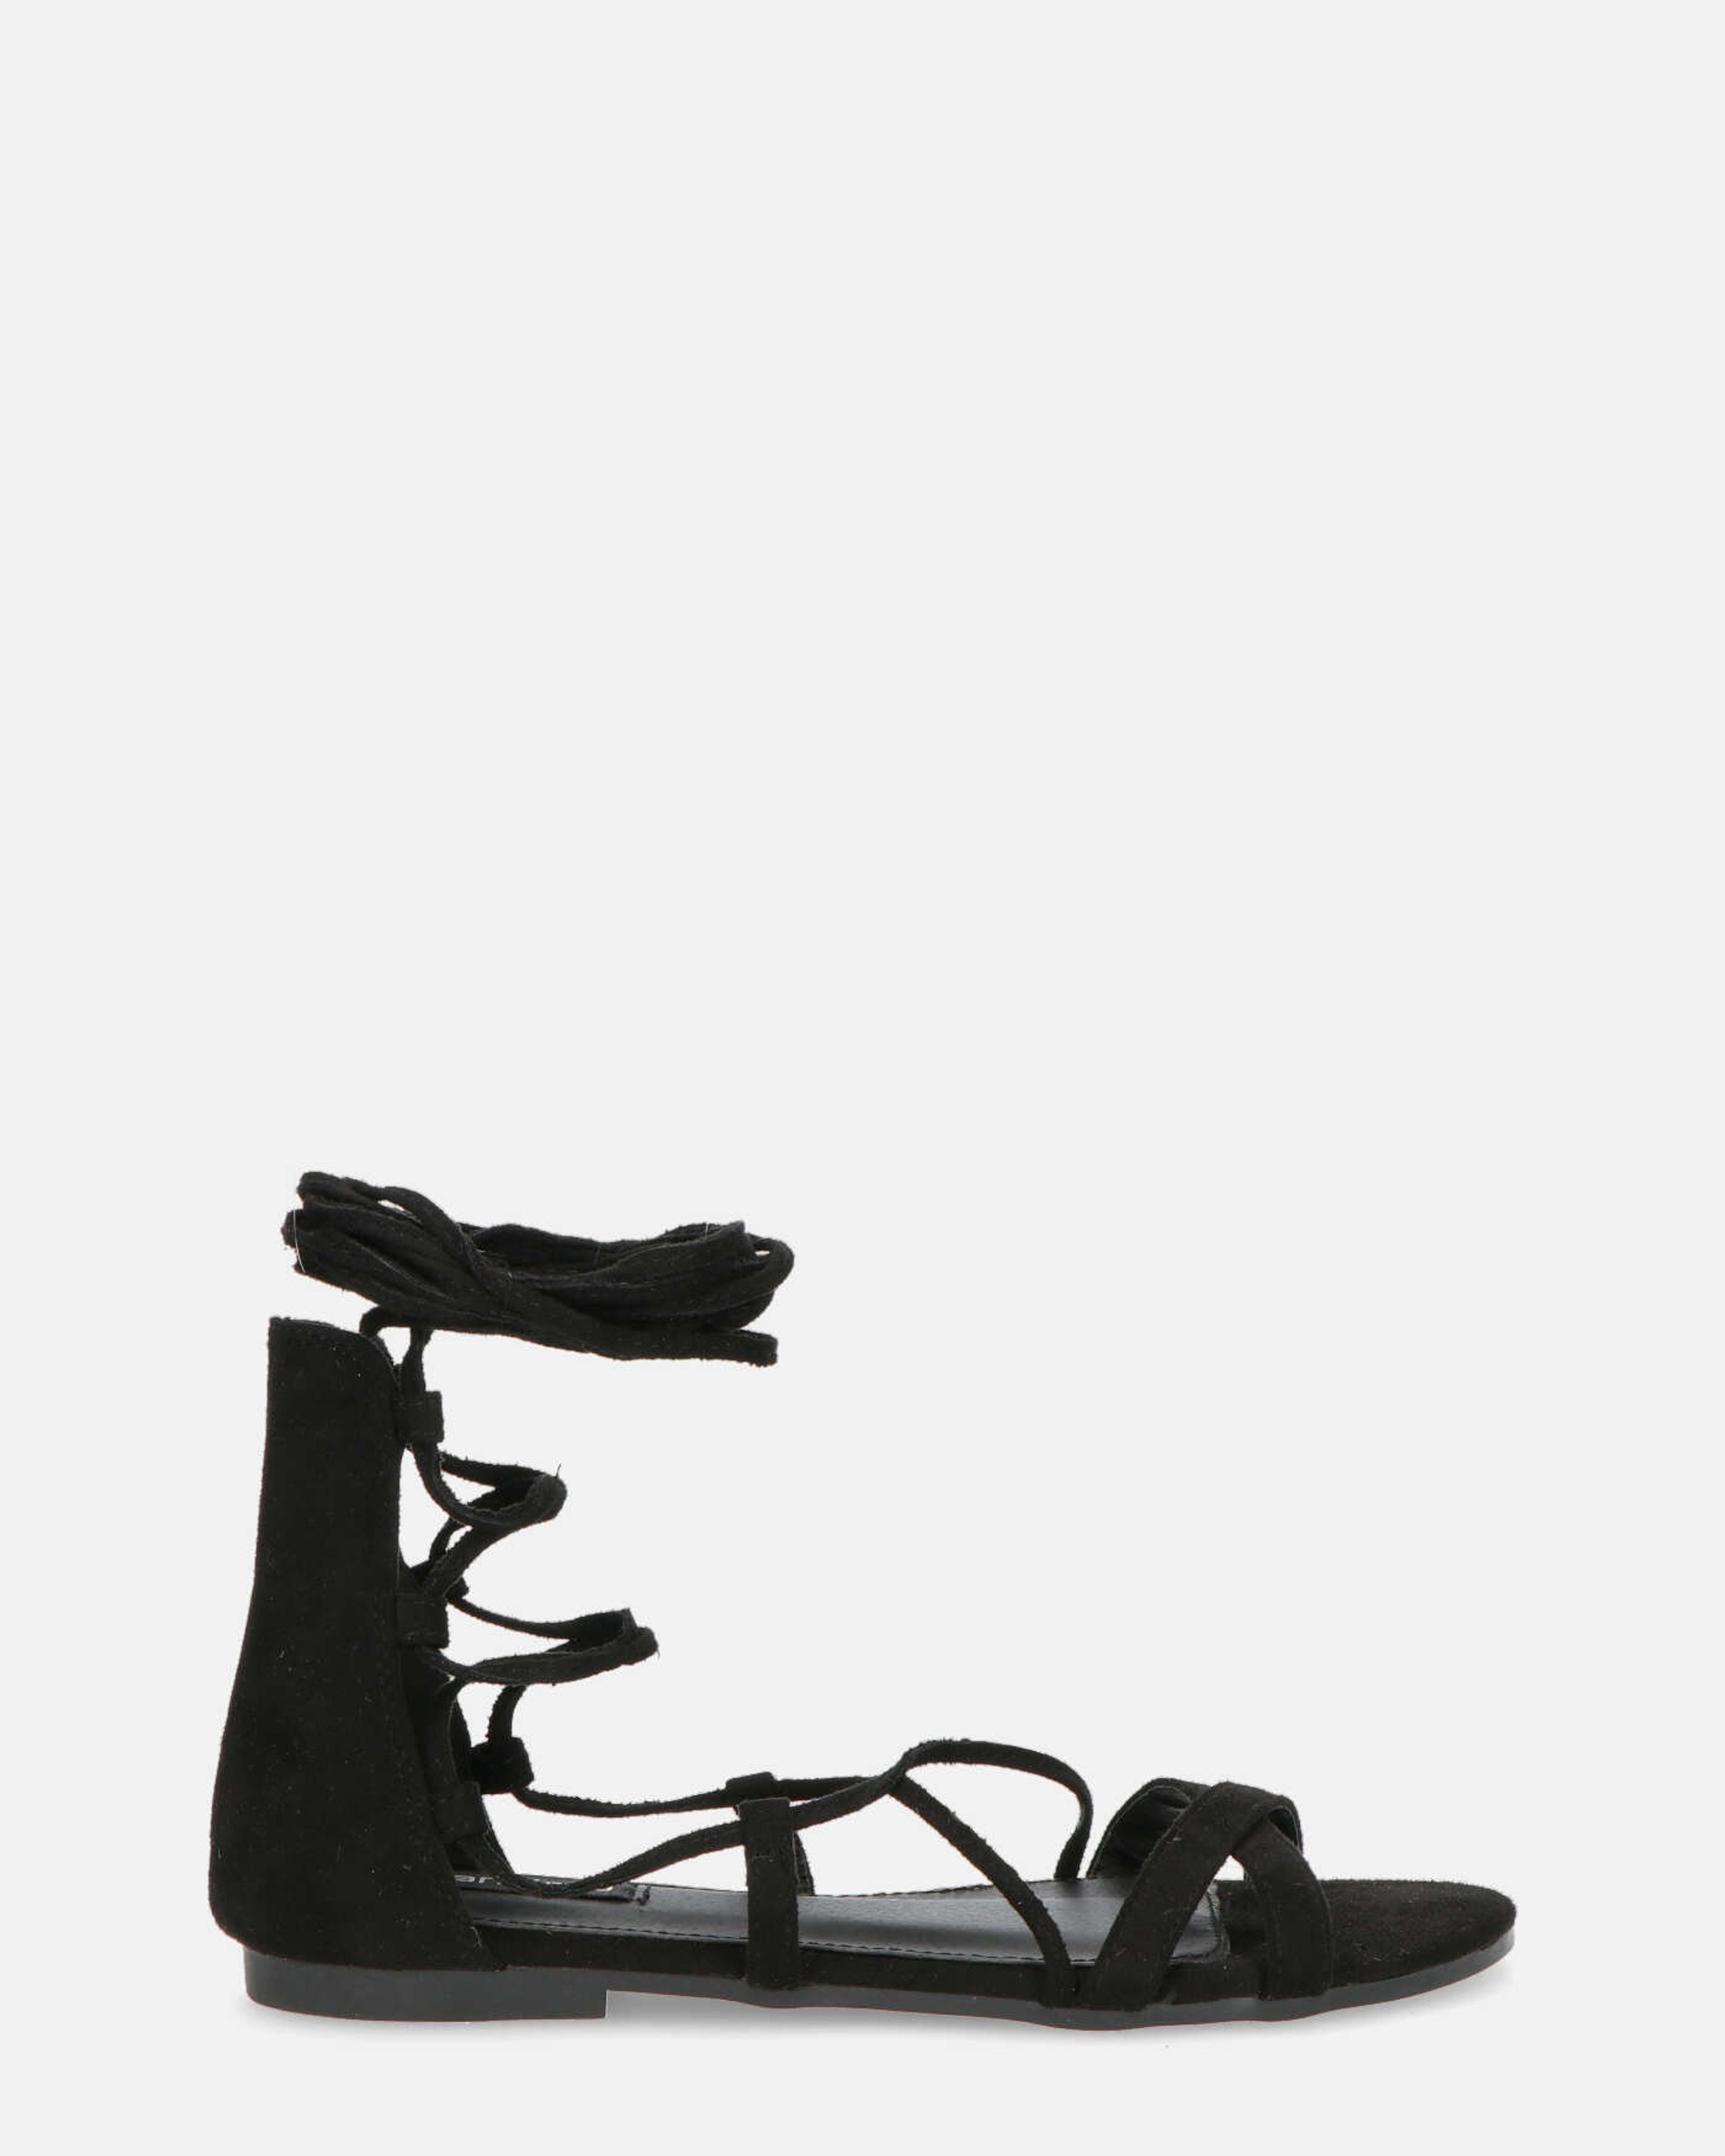 YANNA - lace up flat sandals in black suede